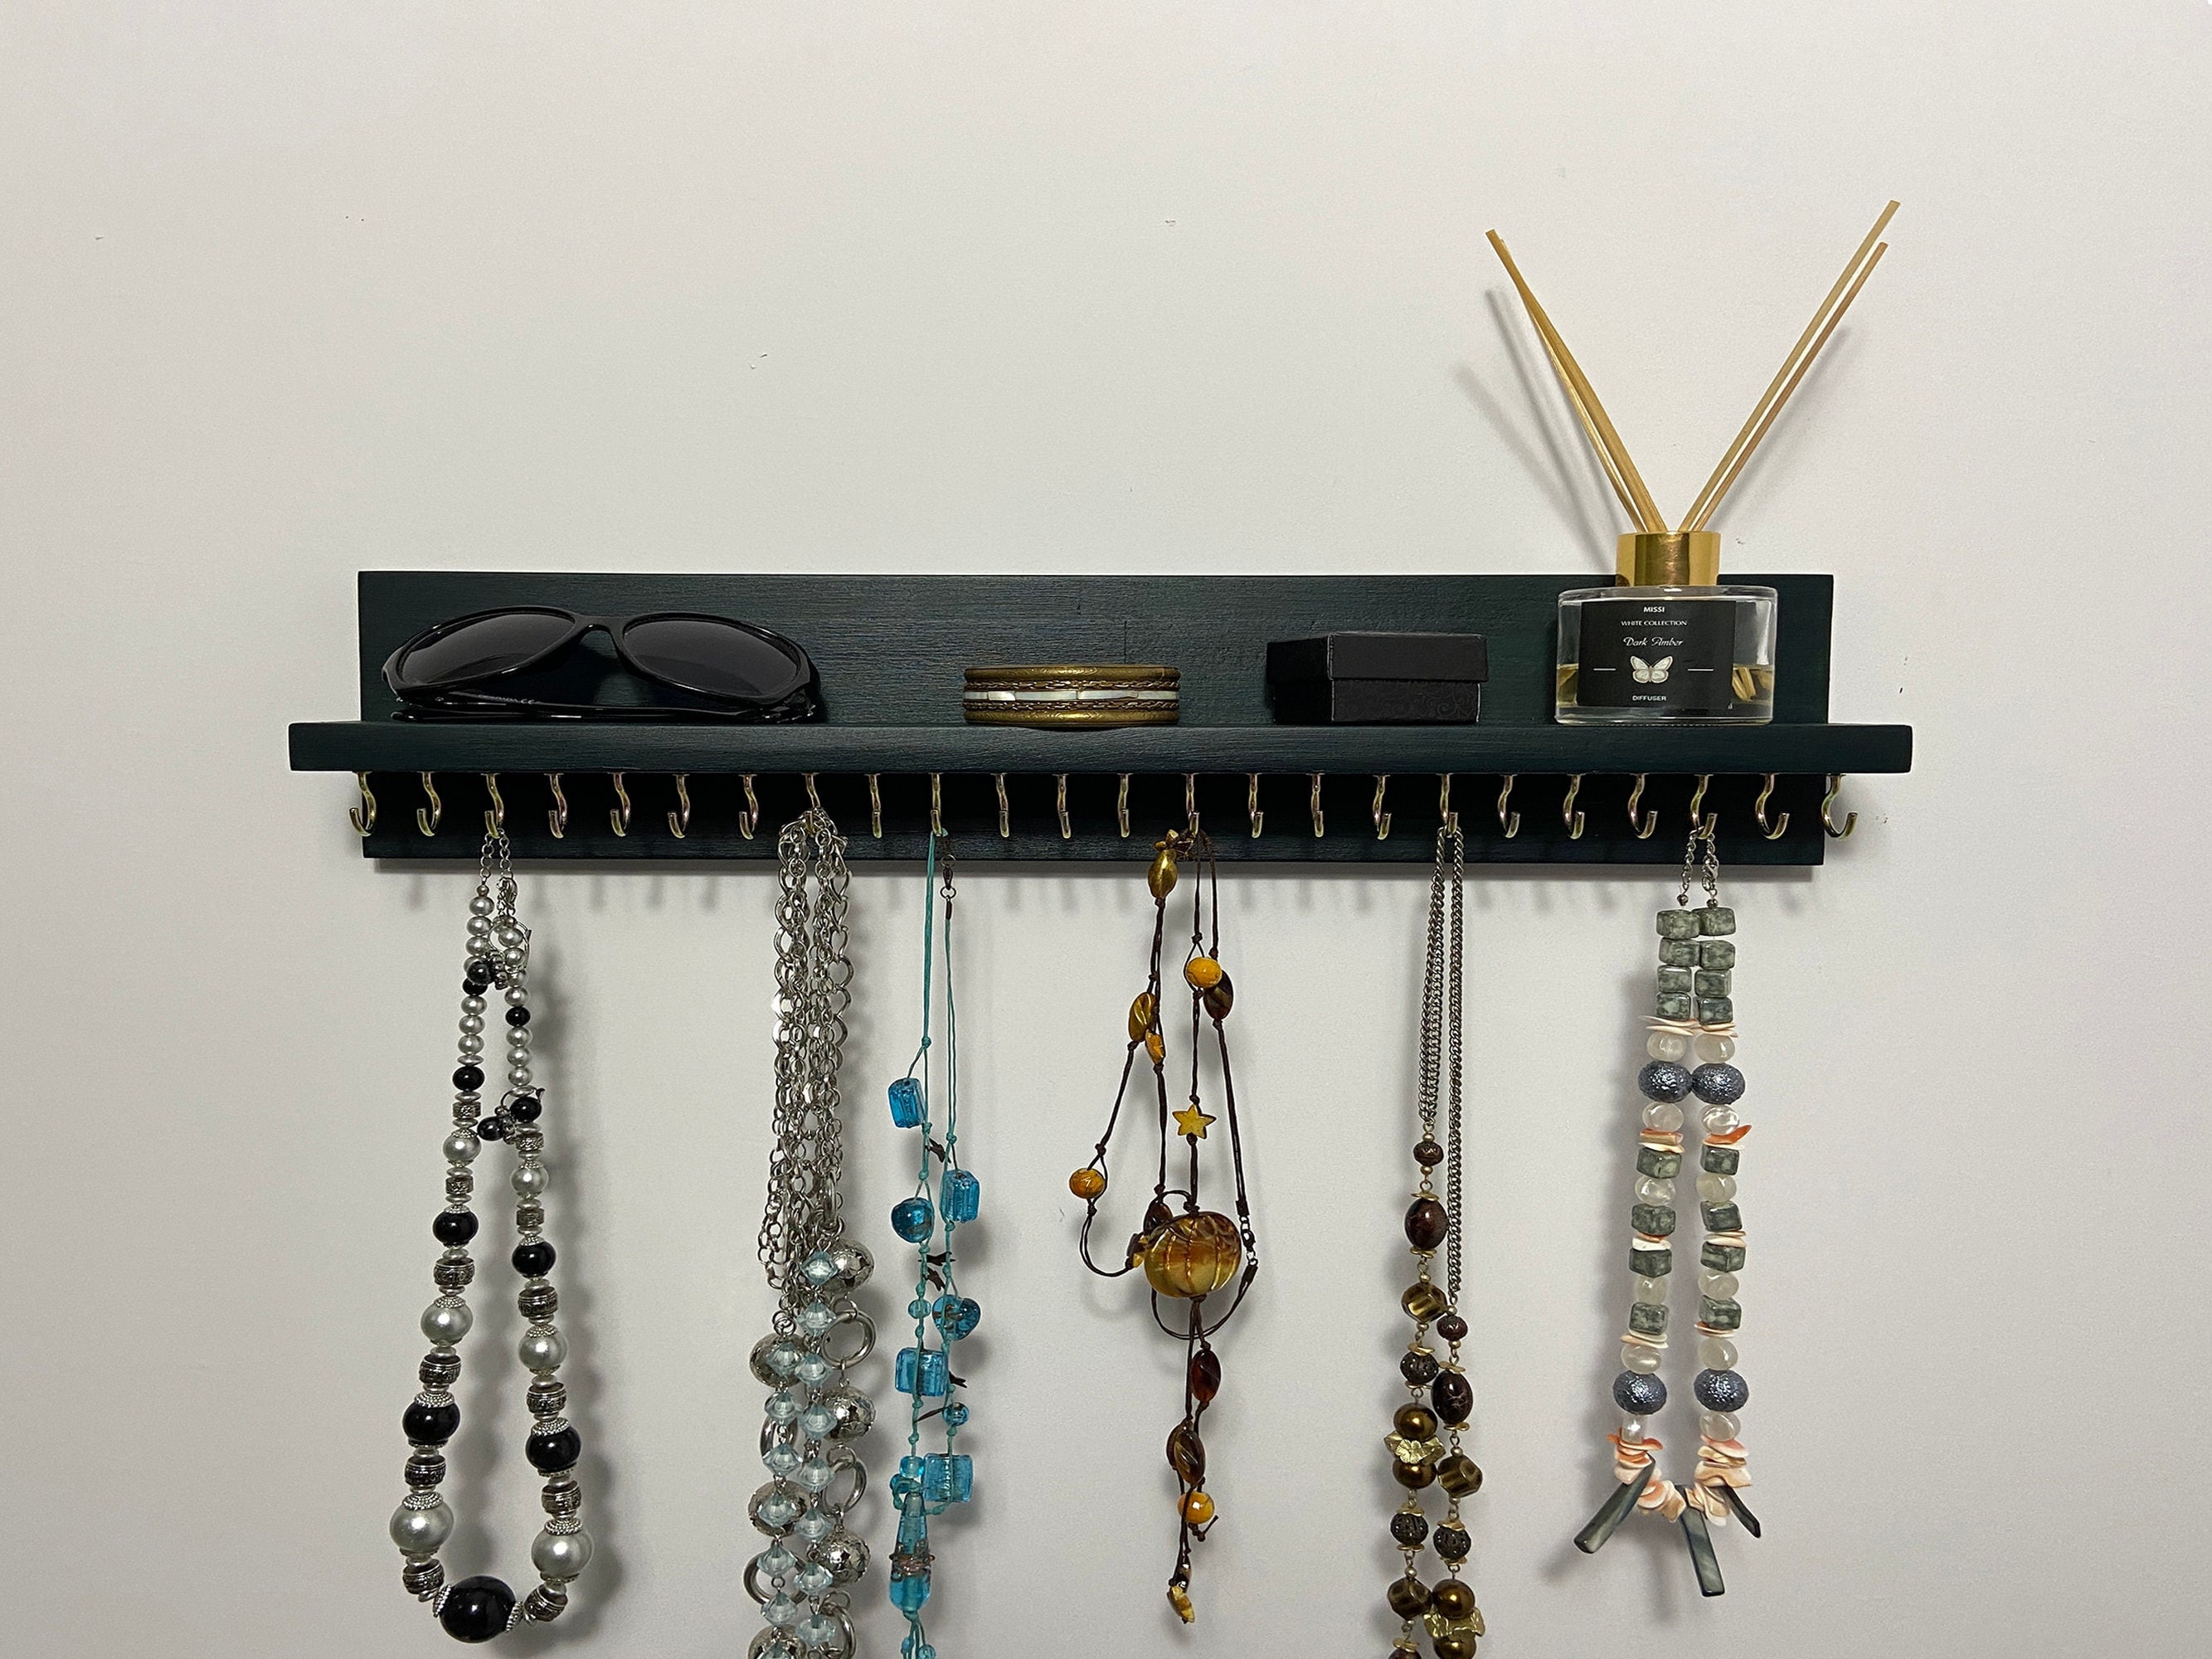 Jewelry Organizer Necklace Holder Wall Mounted Rustic Wood, Necklaces, Earrings  Organizer 